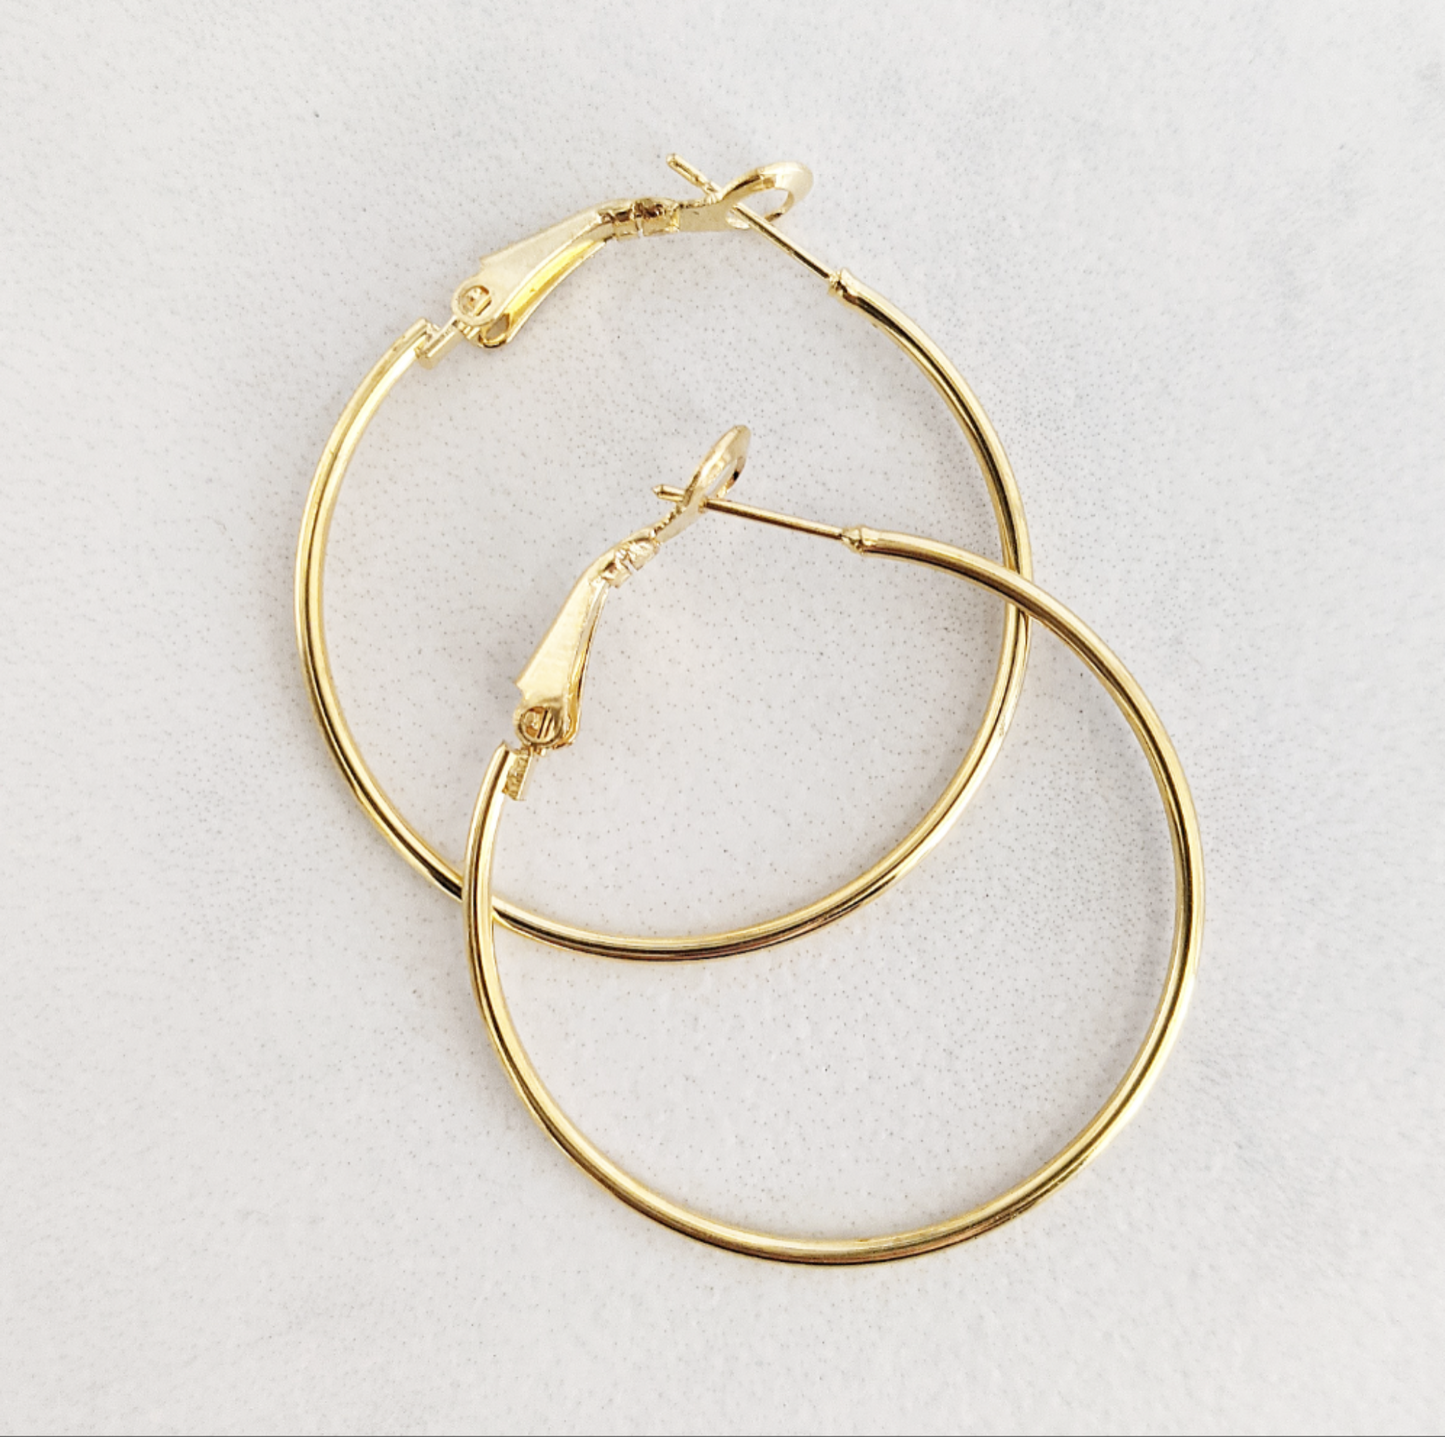 Perfect Every Day Hoops - Gold or Silver